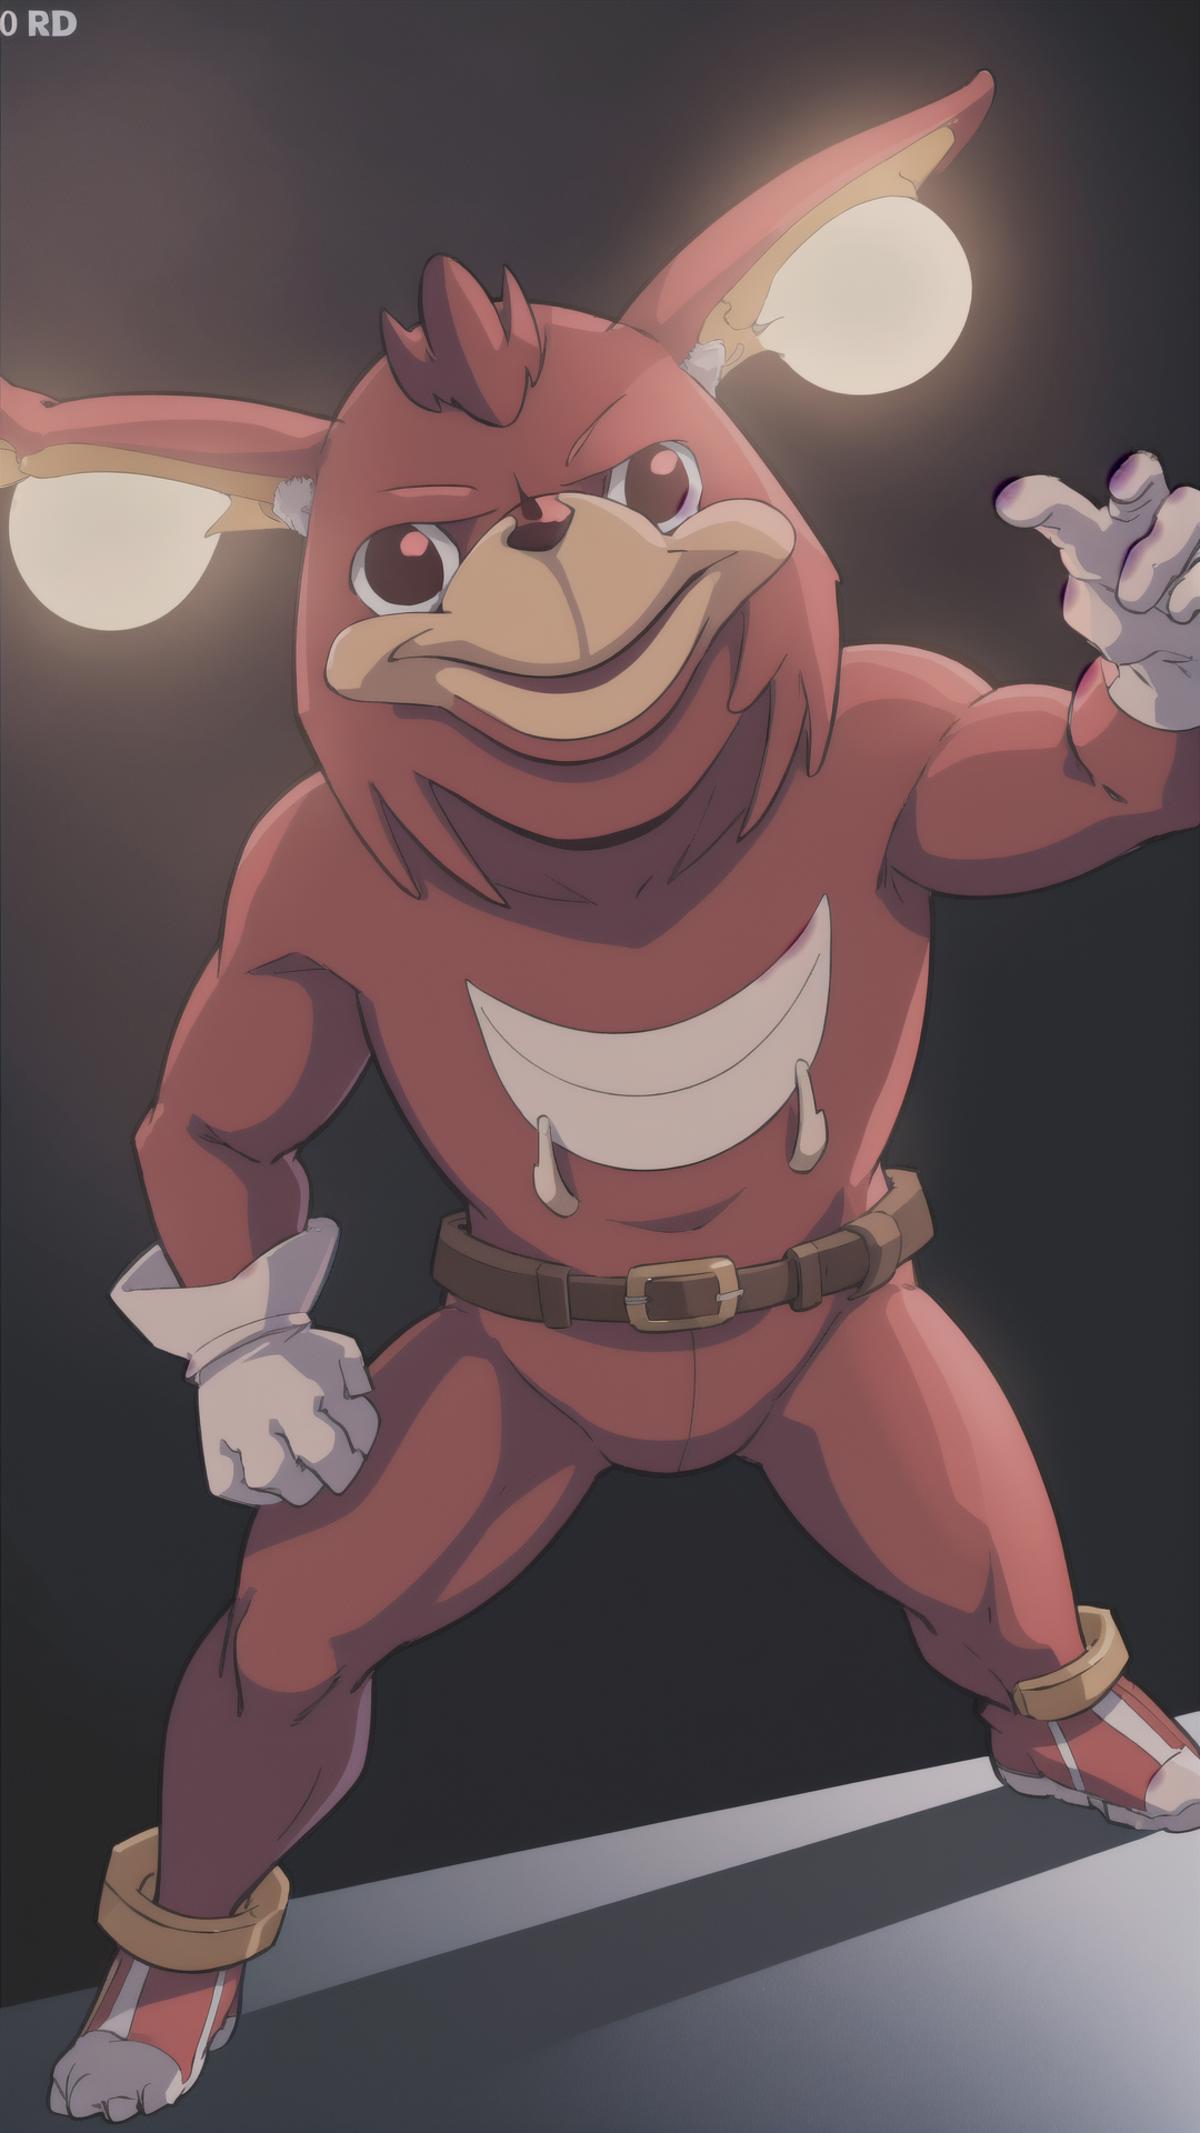 Uganda Knuckles (Sonic the Hedgehog Series) | Character LoRA image by HC94